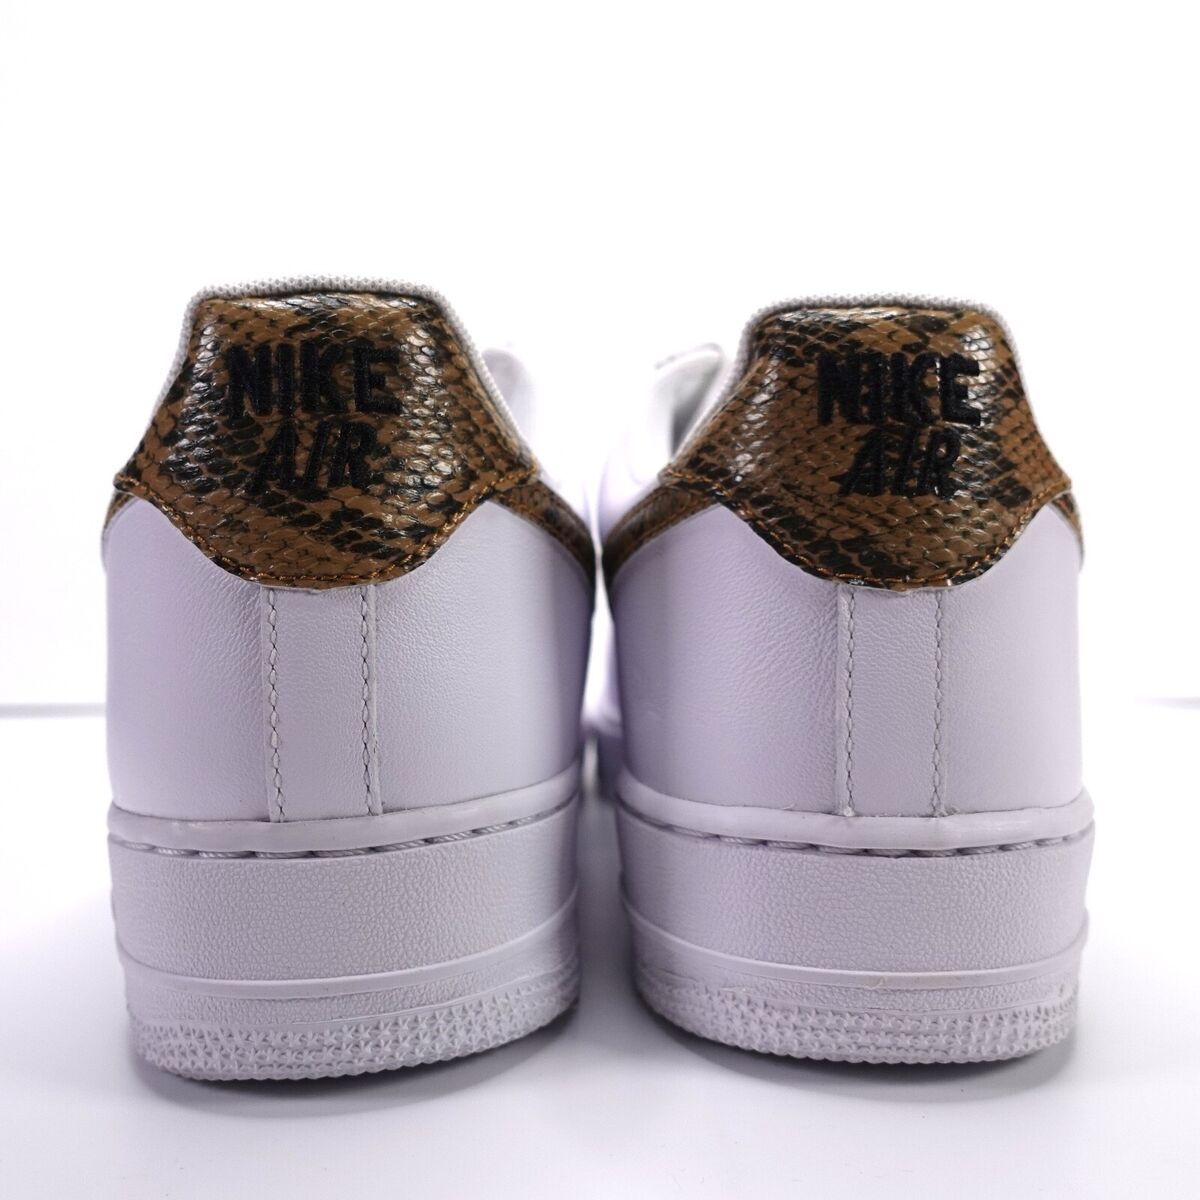 Nike Air Force 1 Low Retro PRM QS Ivory Snake White Gold AO1635 100 Size 11